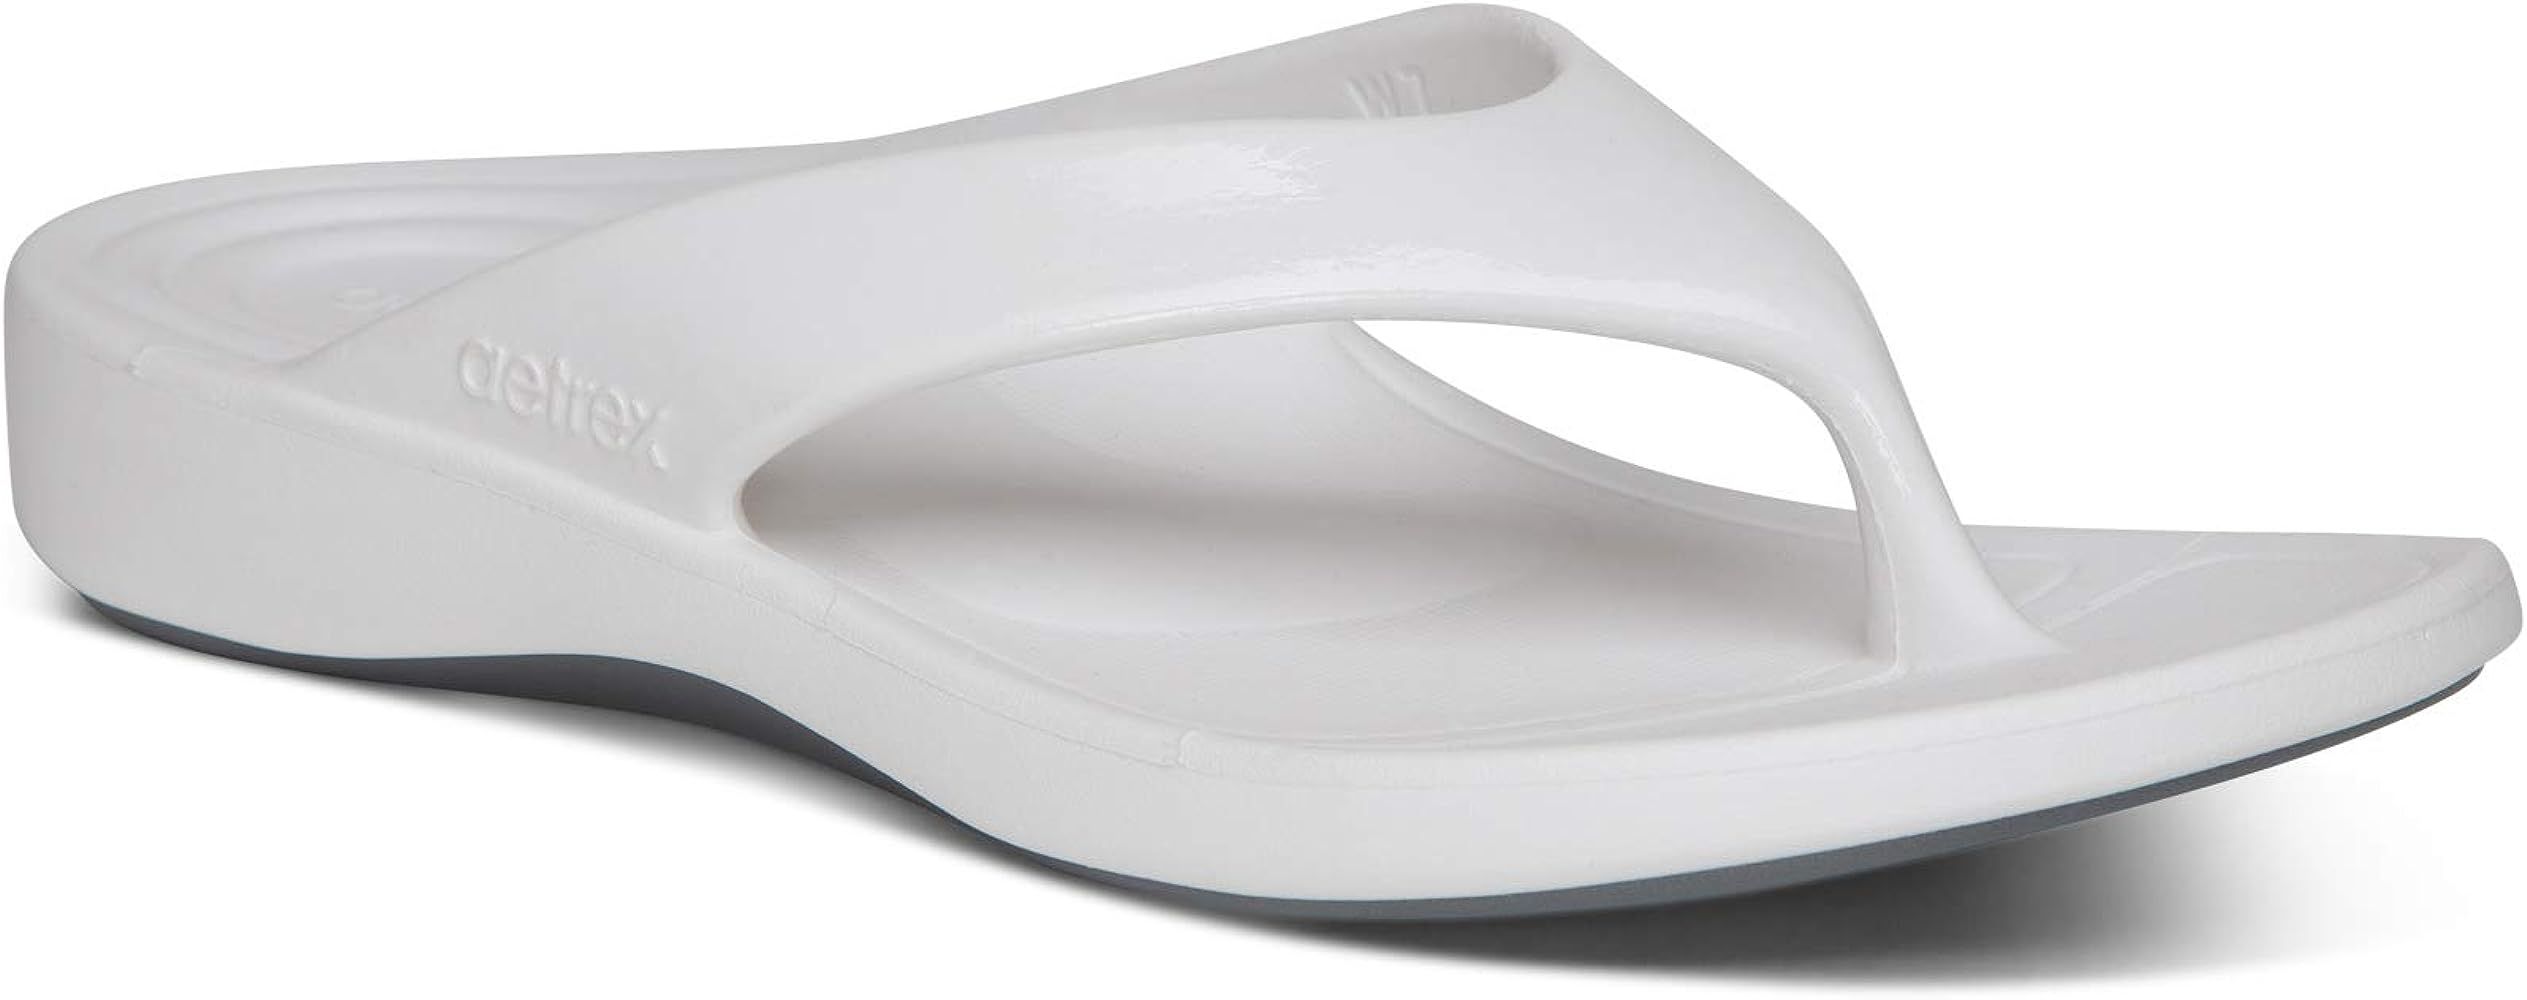 Aetrex Maui Waterfriendly Orthotic Flip Flop with Arch Support | Amazon (US)